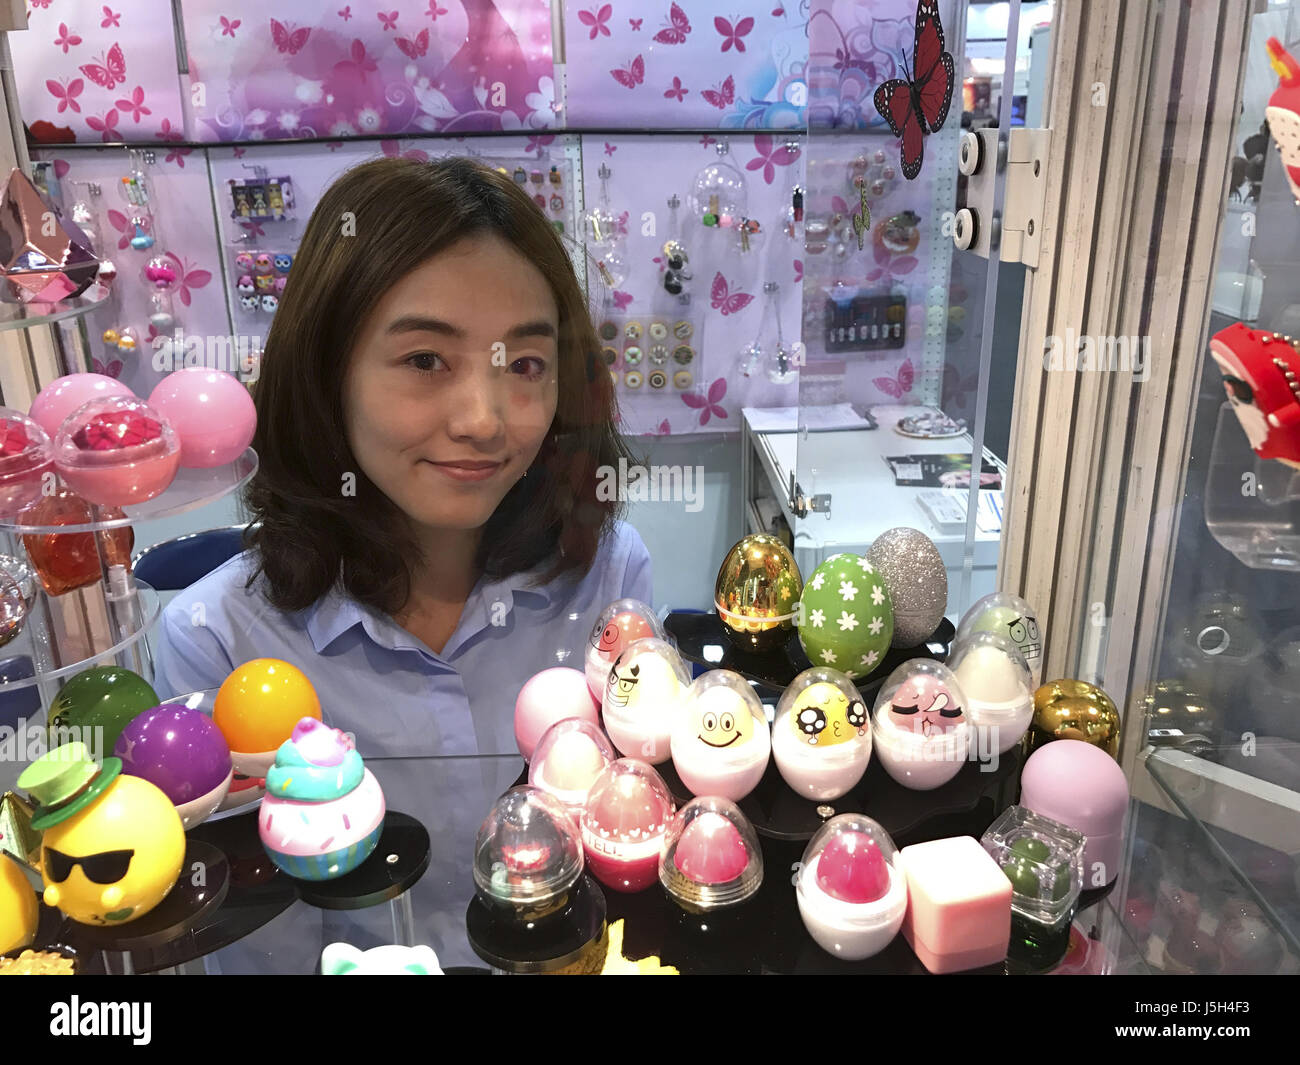 May 16, 2017 - Tokyo, Japan - Dana Lee of Taimeng Beauty Accesories from Taiwan during the Tokyo Nail Forum 2017 on Tuesday May 16, 2017. Photo by: Ramiro Agustin Vargas Tabares (Credit Image: © Ramiro Agustin Vargas Tabares via ZUMA Wire) Stock Photo